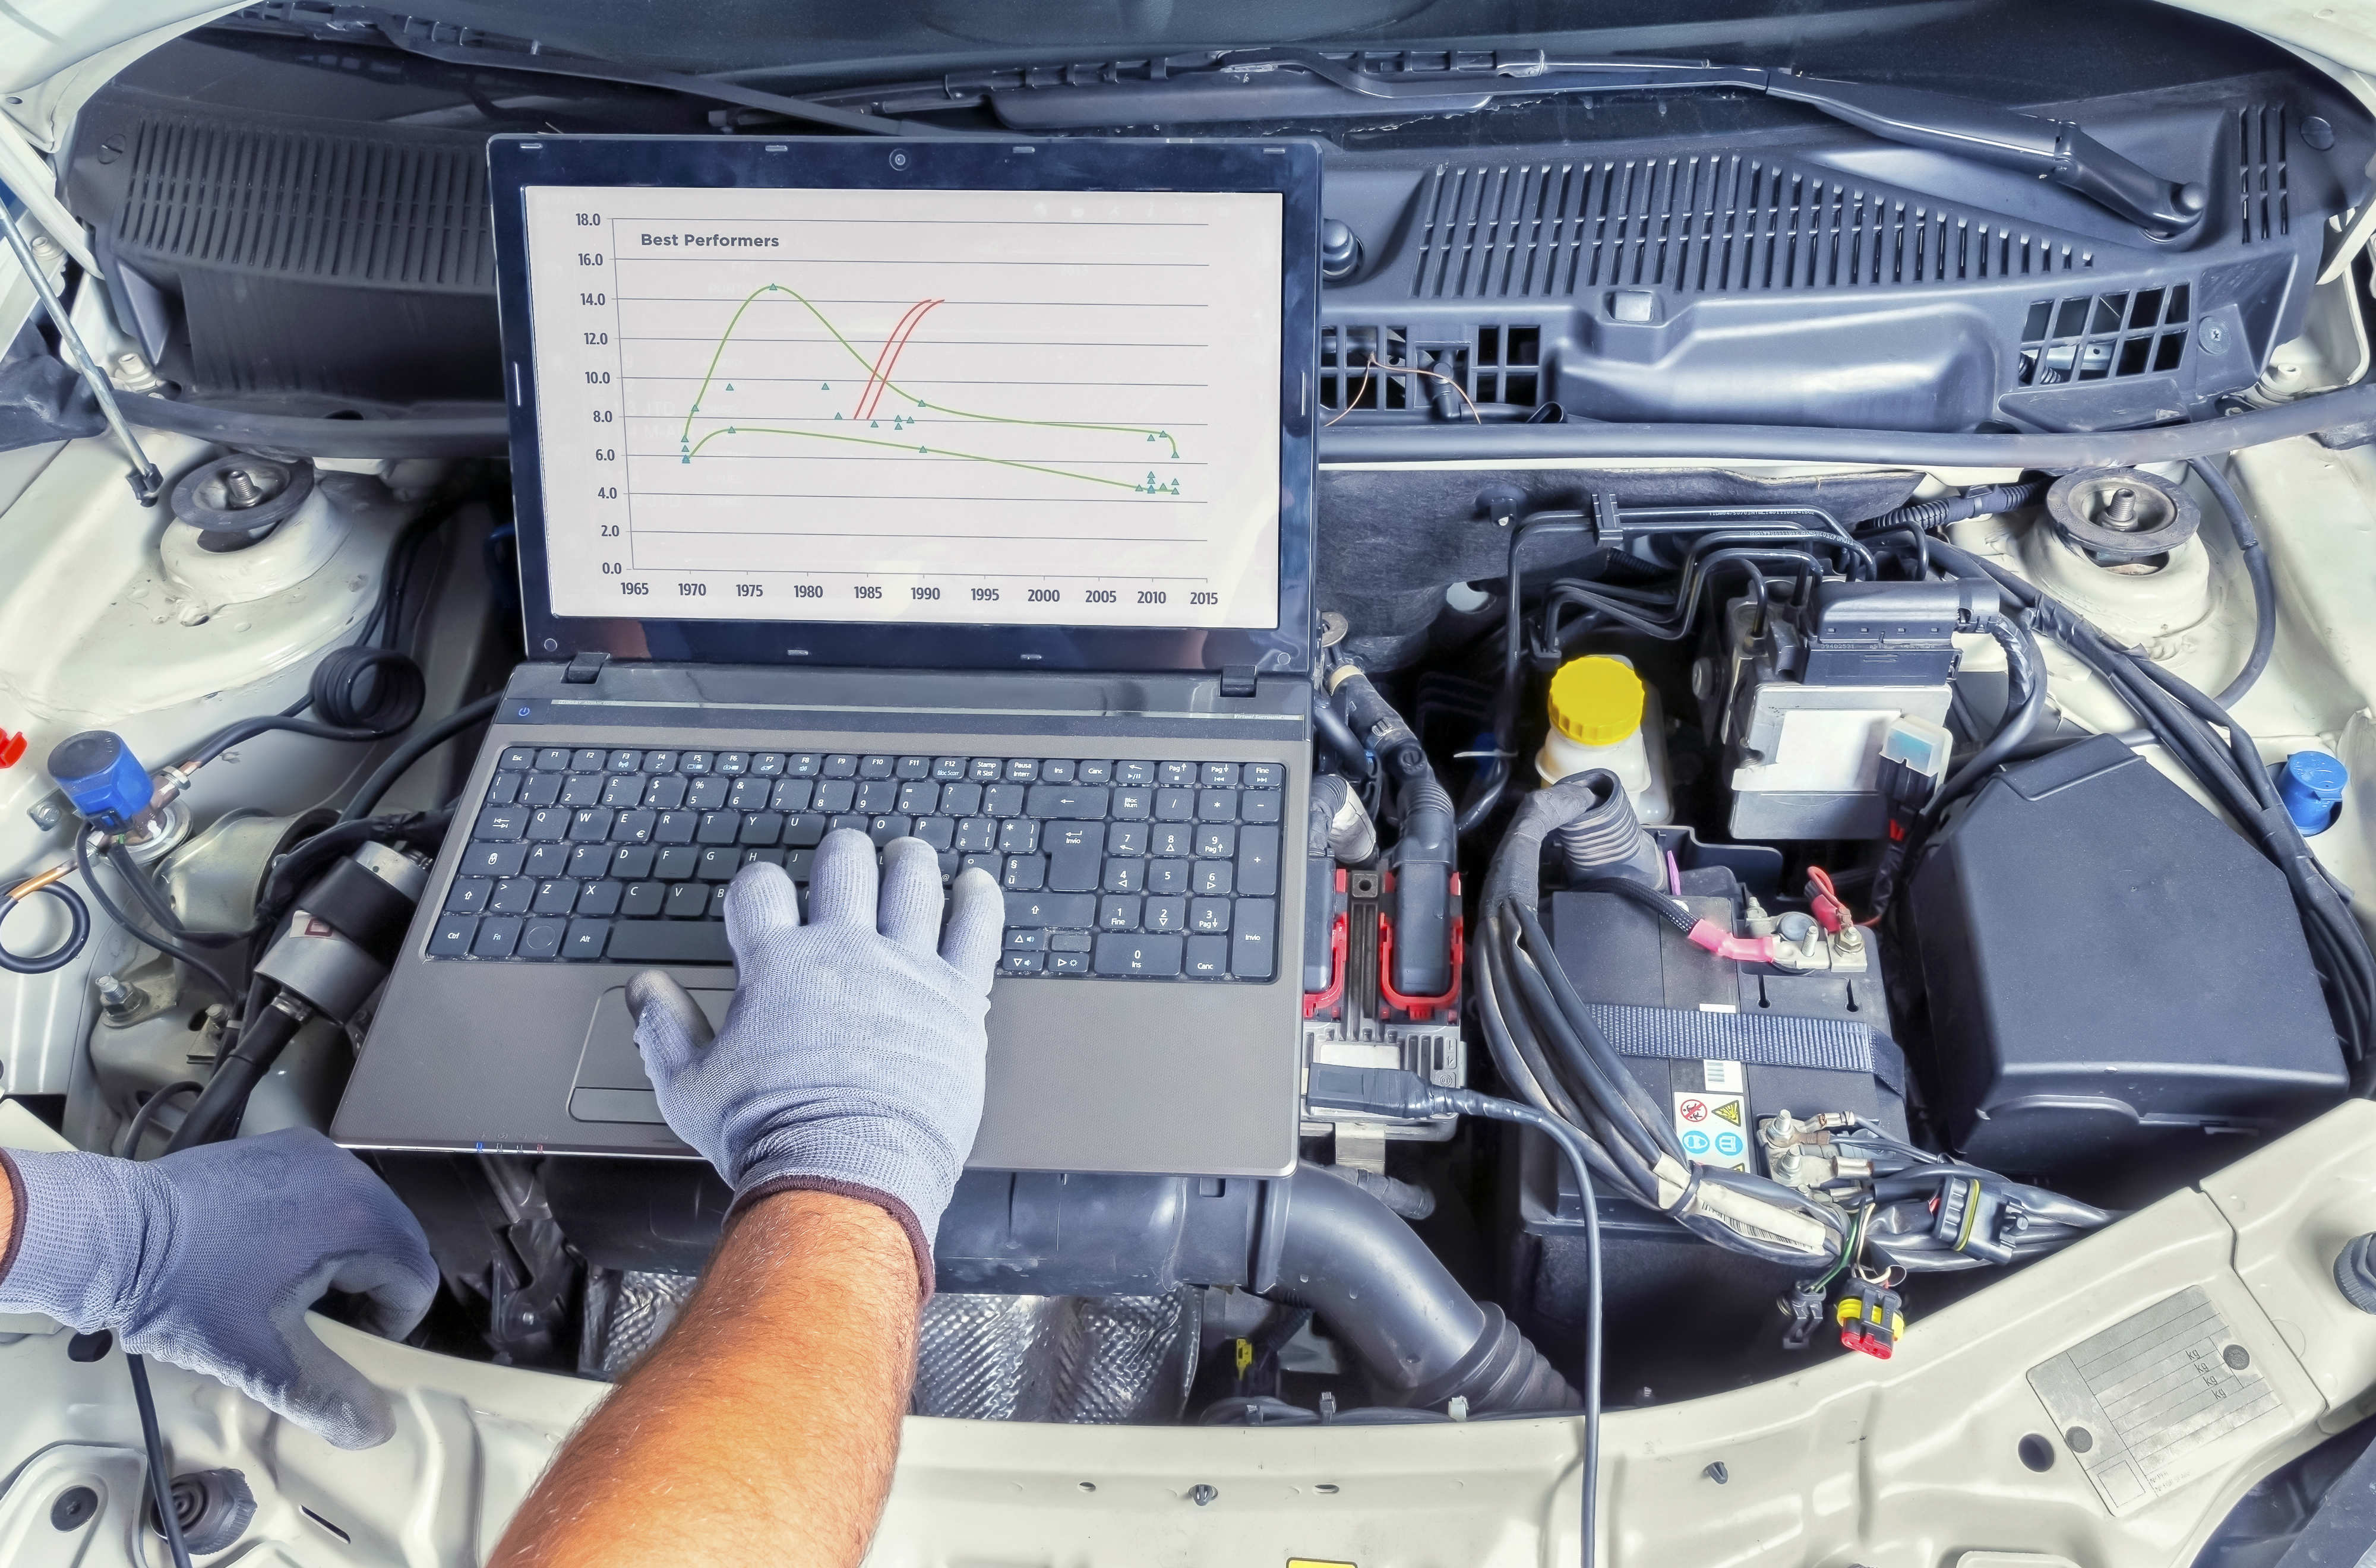 Car servicing: always check what work, extras and guarantees are included